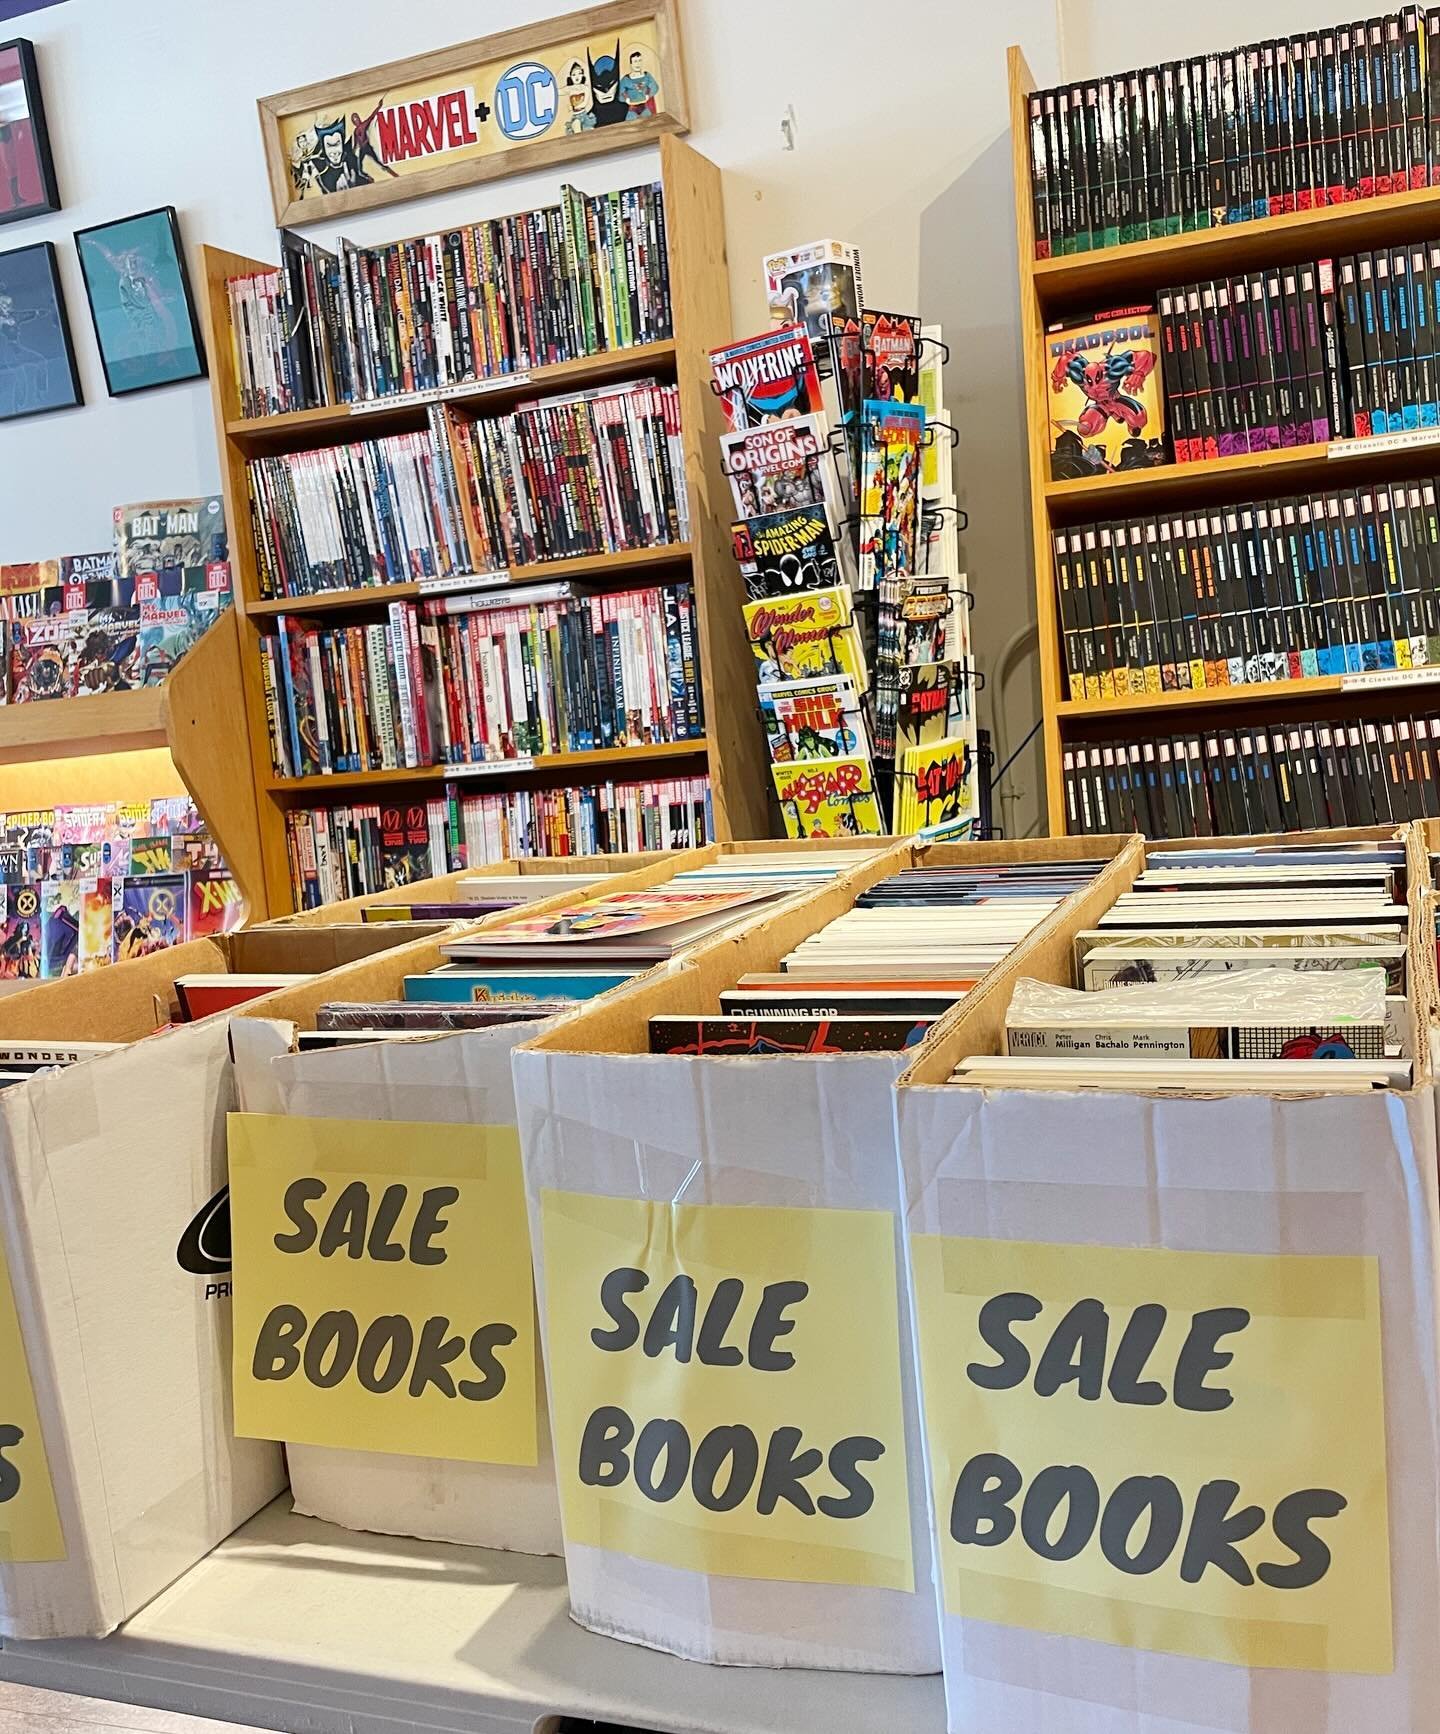 sun is out and so are our sale books! 

Help us with some spring cleaning and pickup some books on your way to the park 🌷